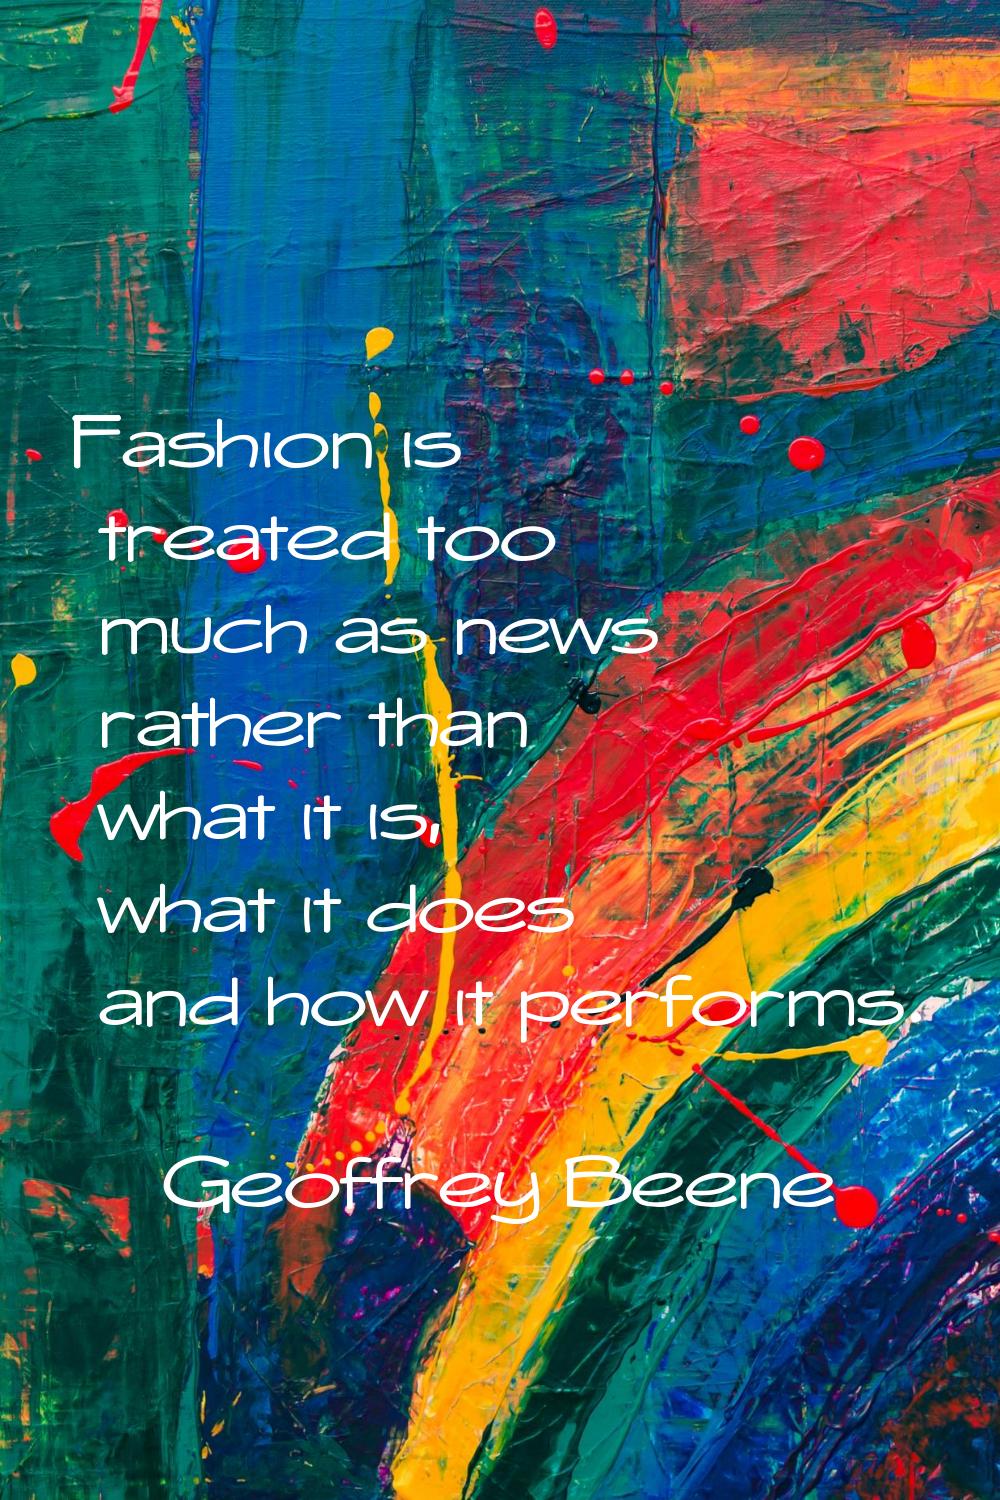 Fashion is treated too much as news rather than what it is, what it does and how it performs.